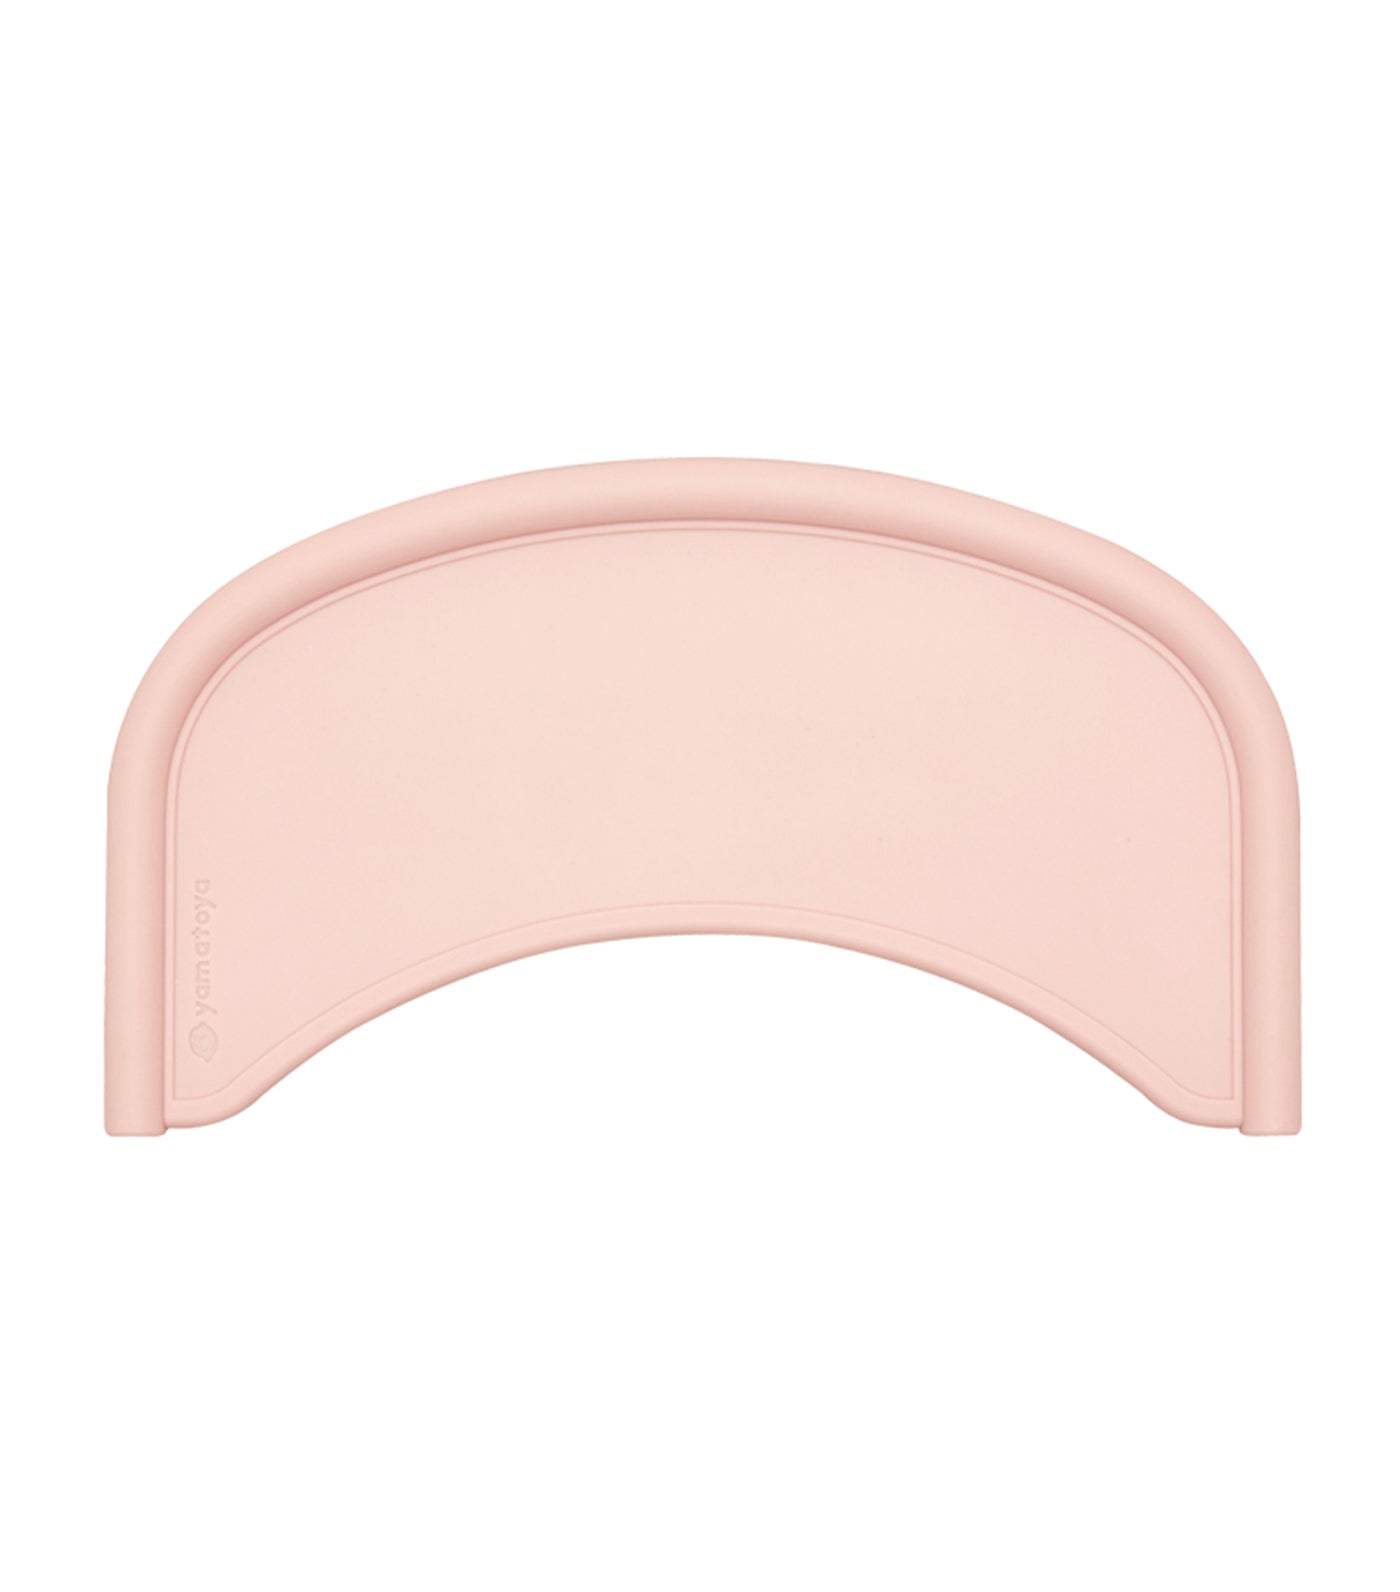 Materna/Affel Silicone Table Mat - Pink